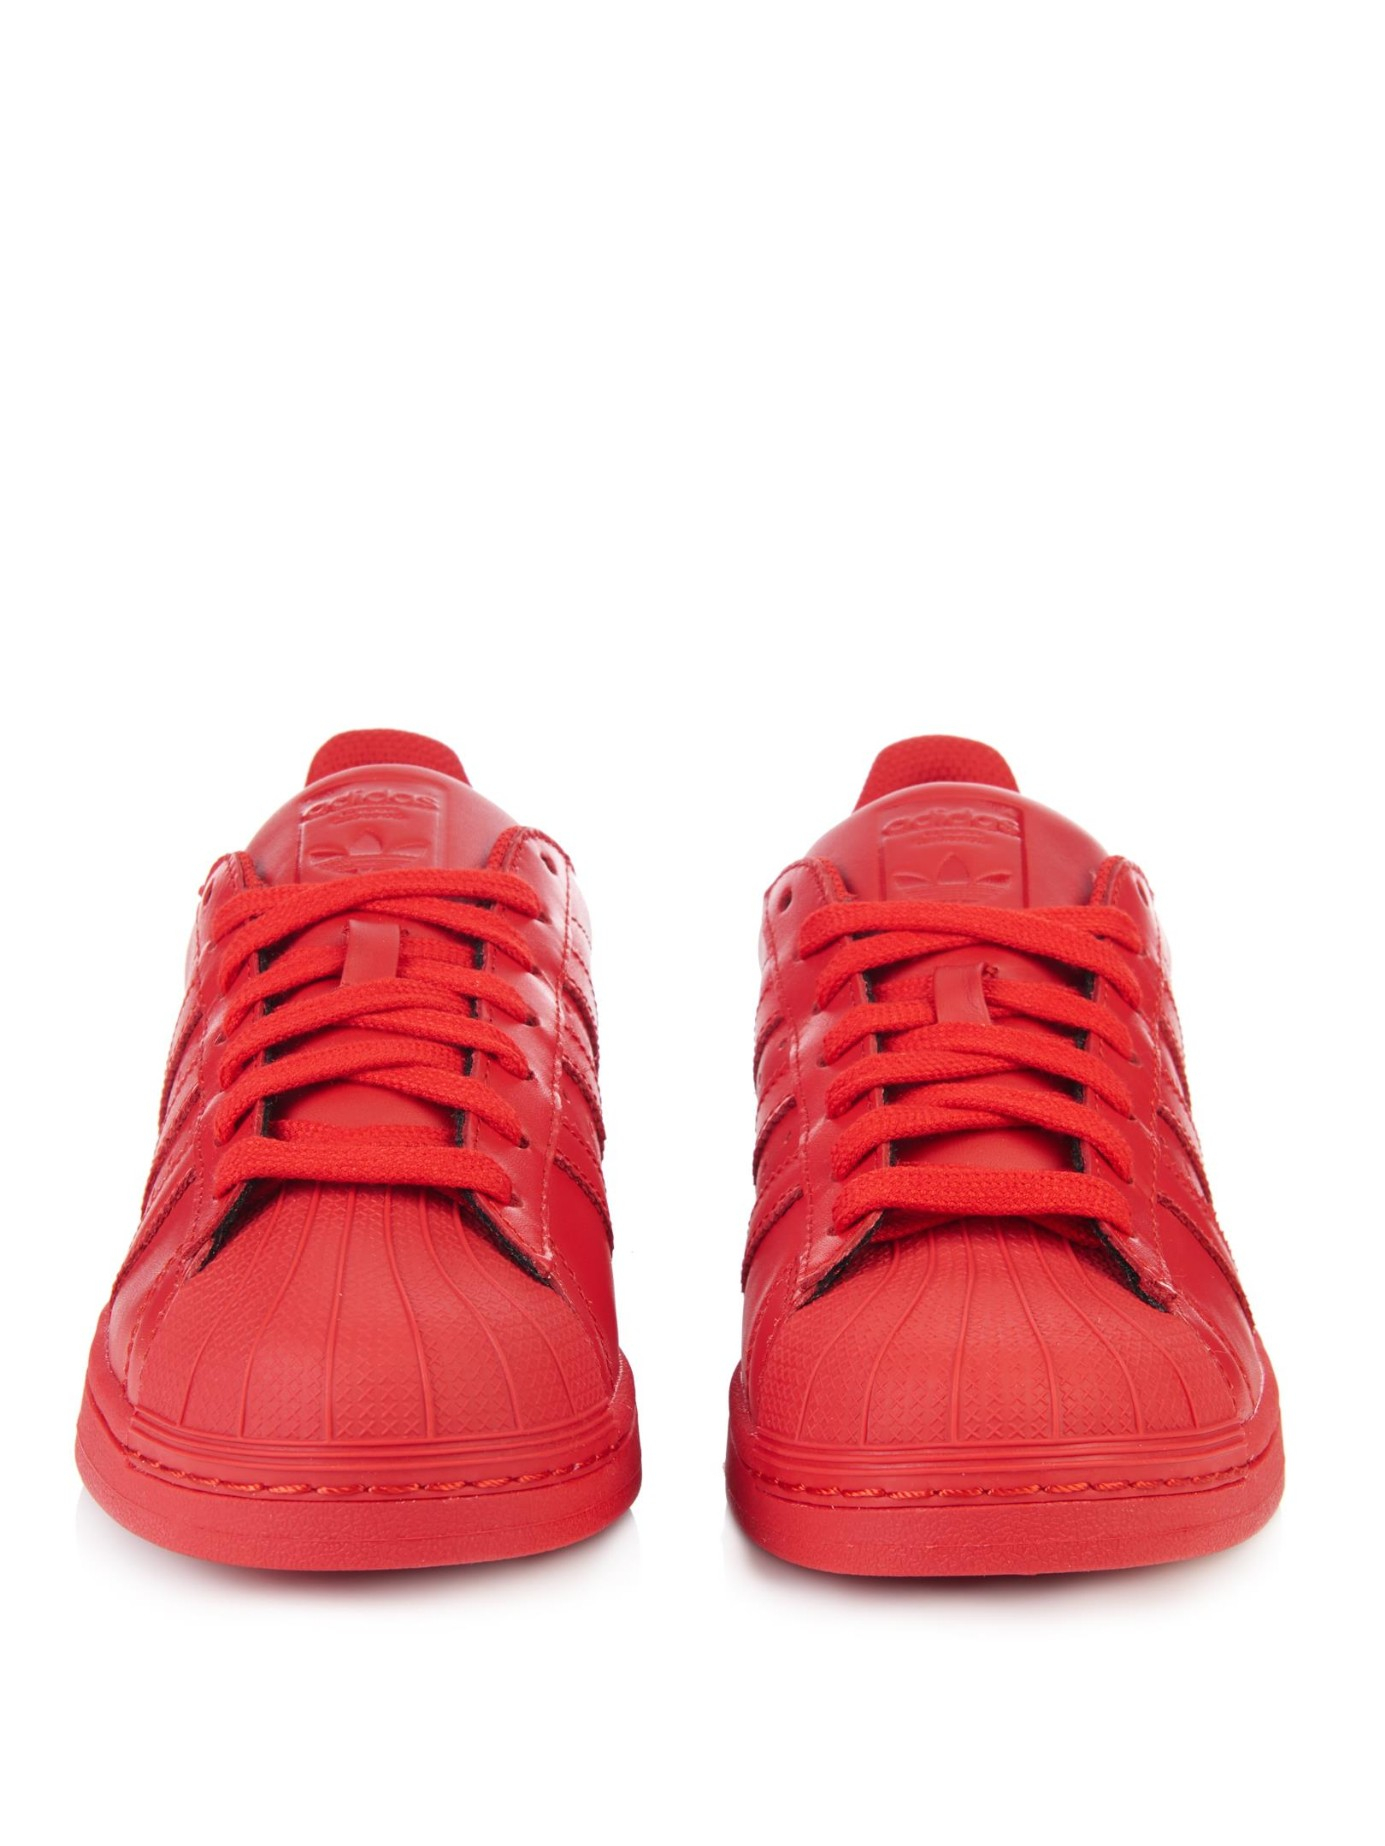 red leather adidas shoes